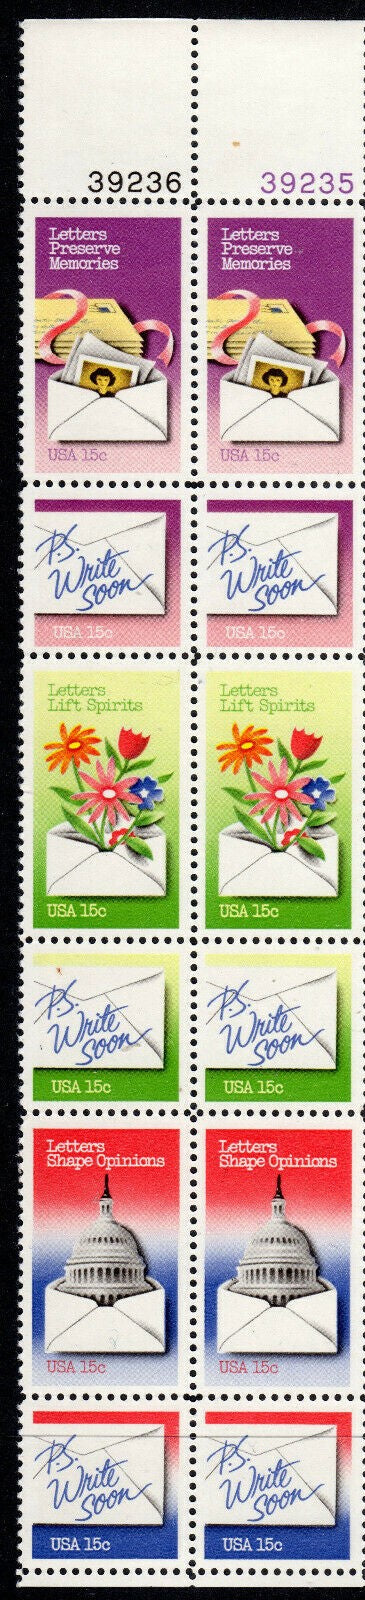 1979 Letter Writing Week Strip Of 12 15c Postage Stamps With Plate Numbers - Sc# 1805-1810 - MNH, OG - CW30a